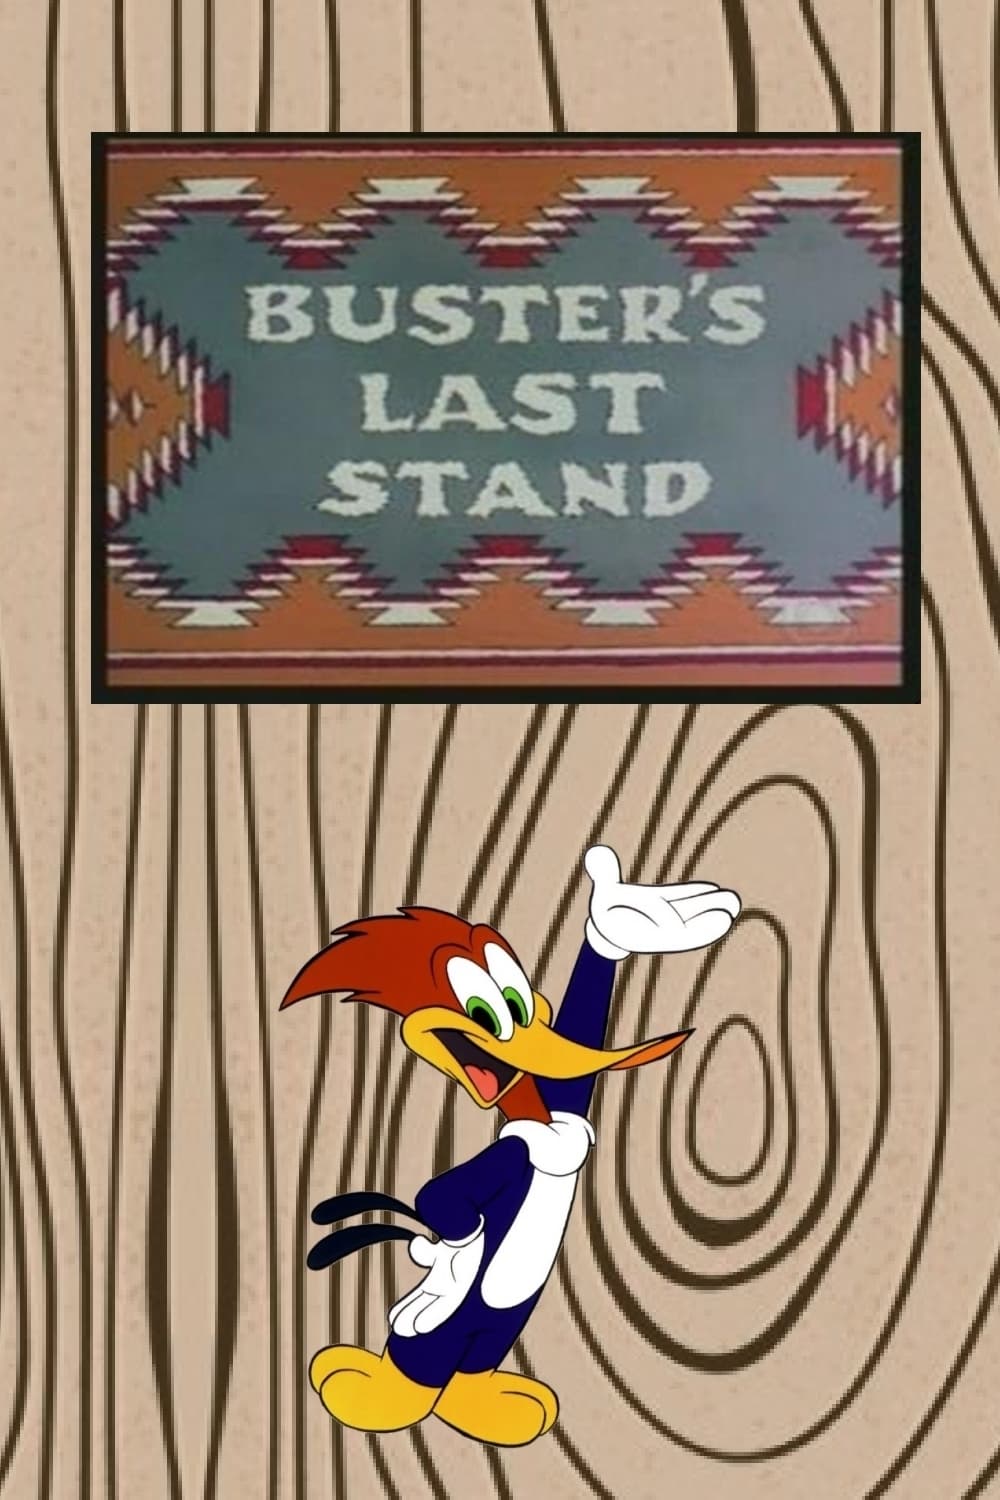 Buster's Last Stand